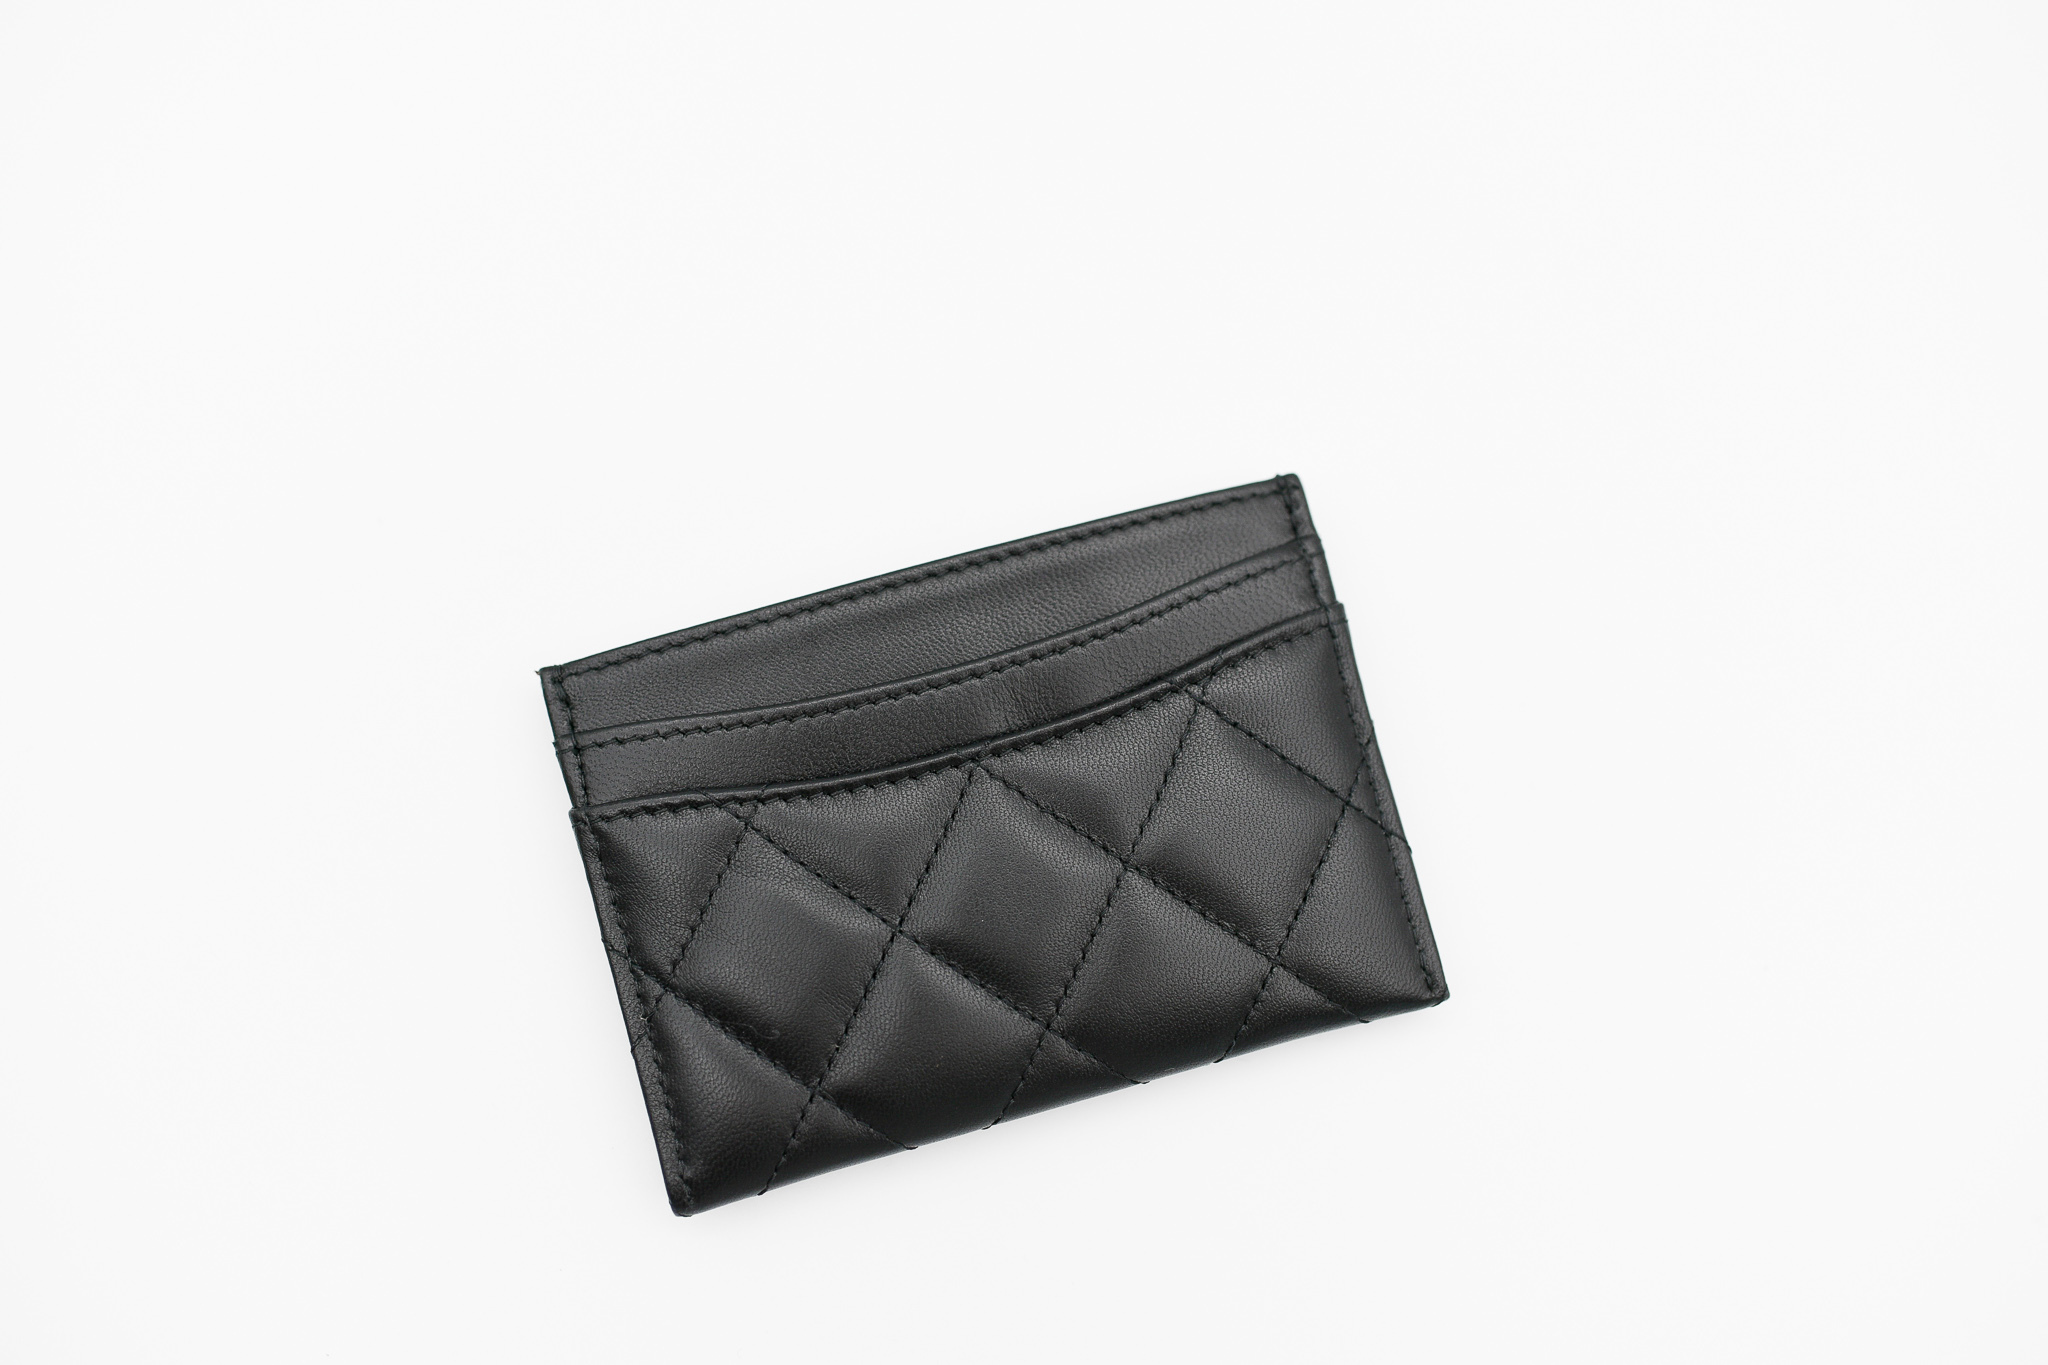 Chanel Classic Flat Card Holder, Black Lambskin with Gold Hardware